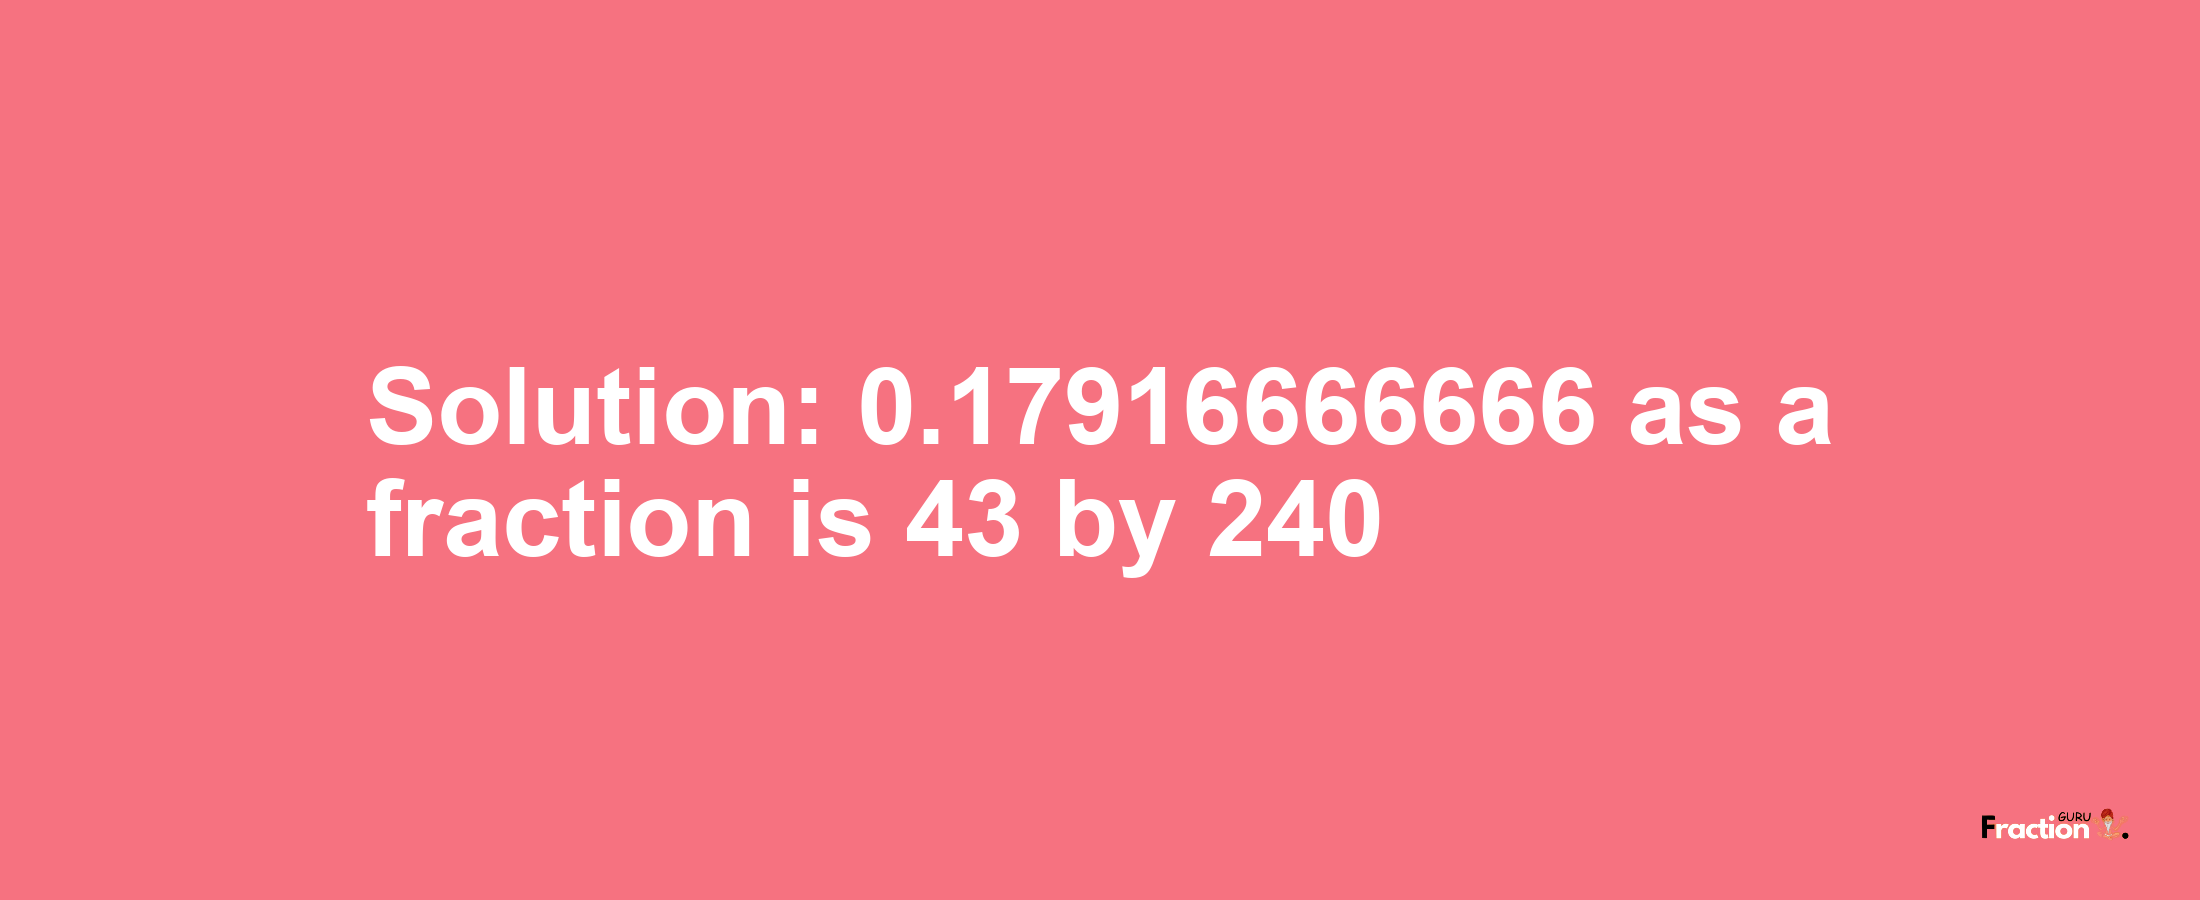 Solution:0.17916666666 as a fraction is 43/240